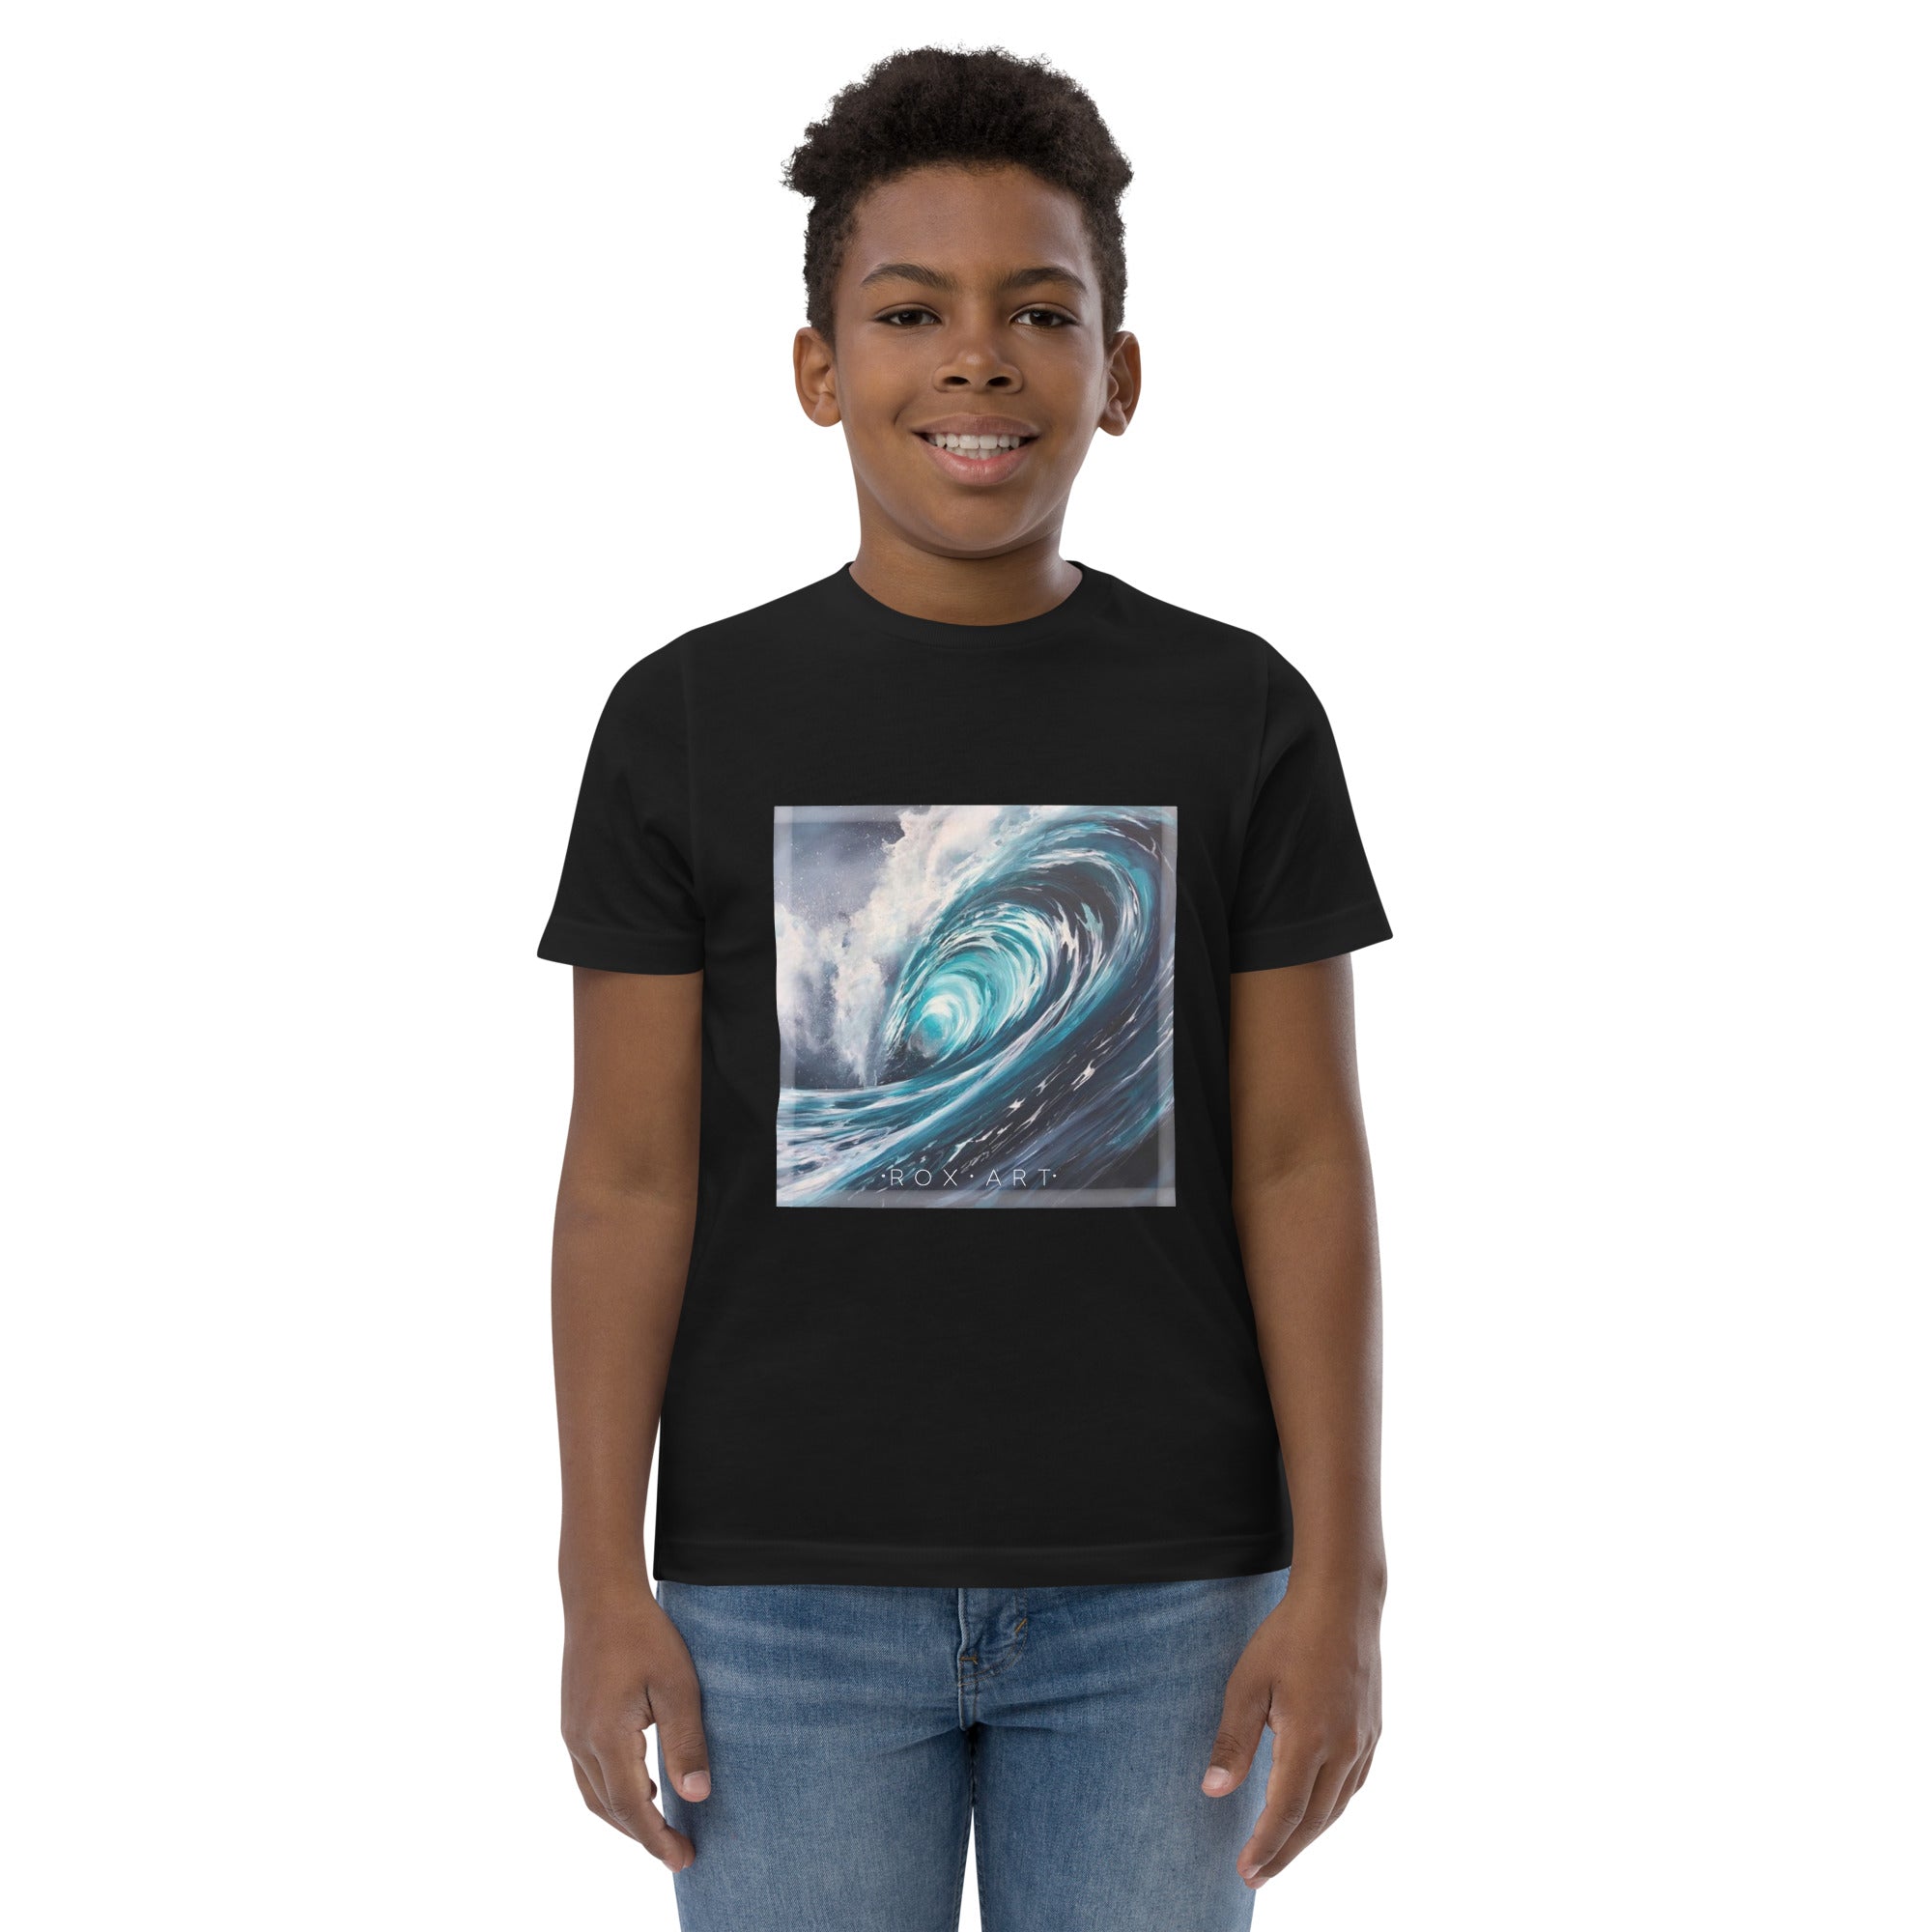 Youth Blue Wave Tee